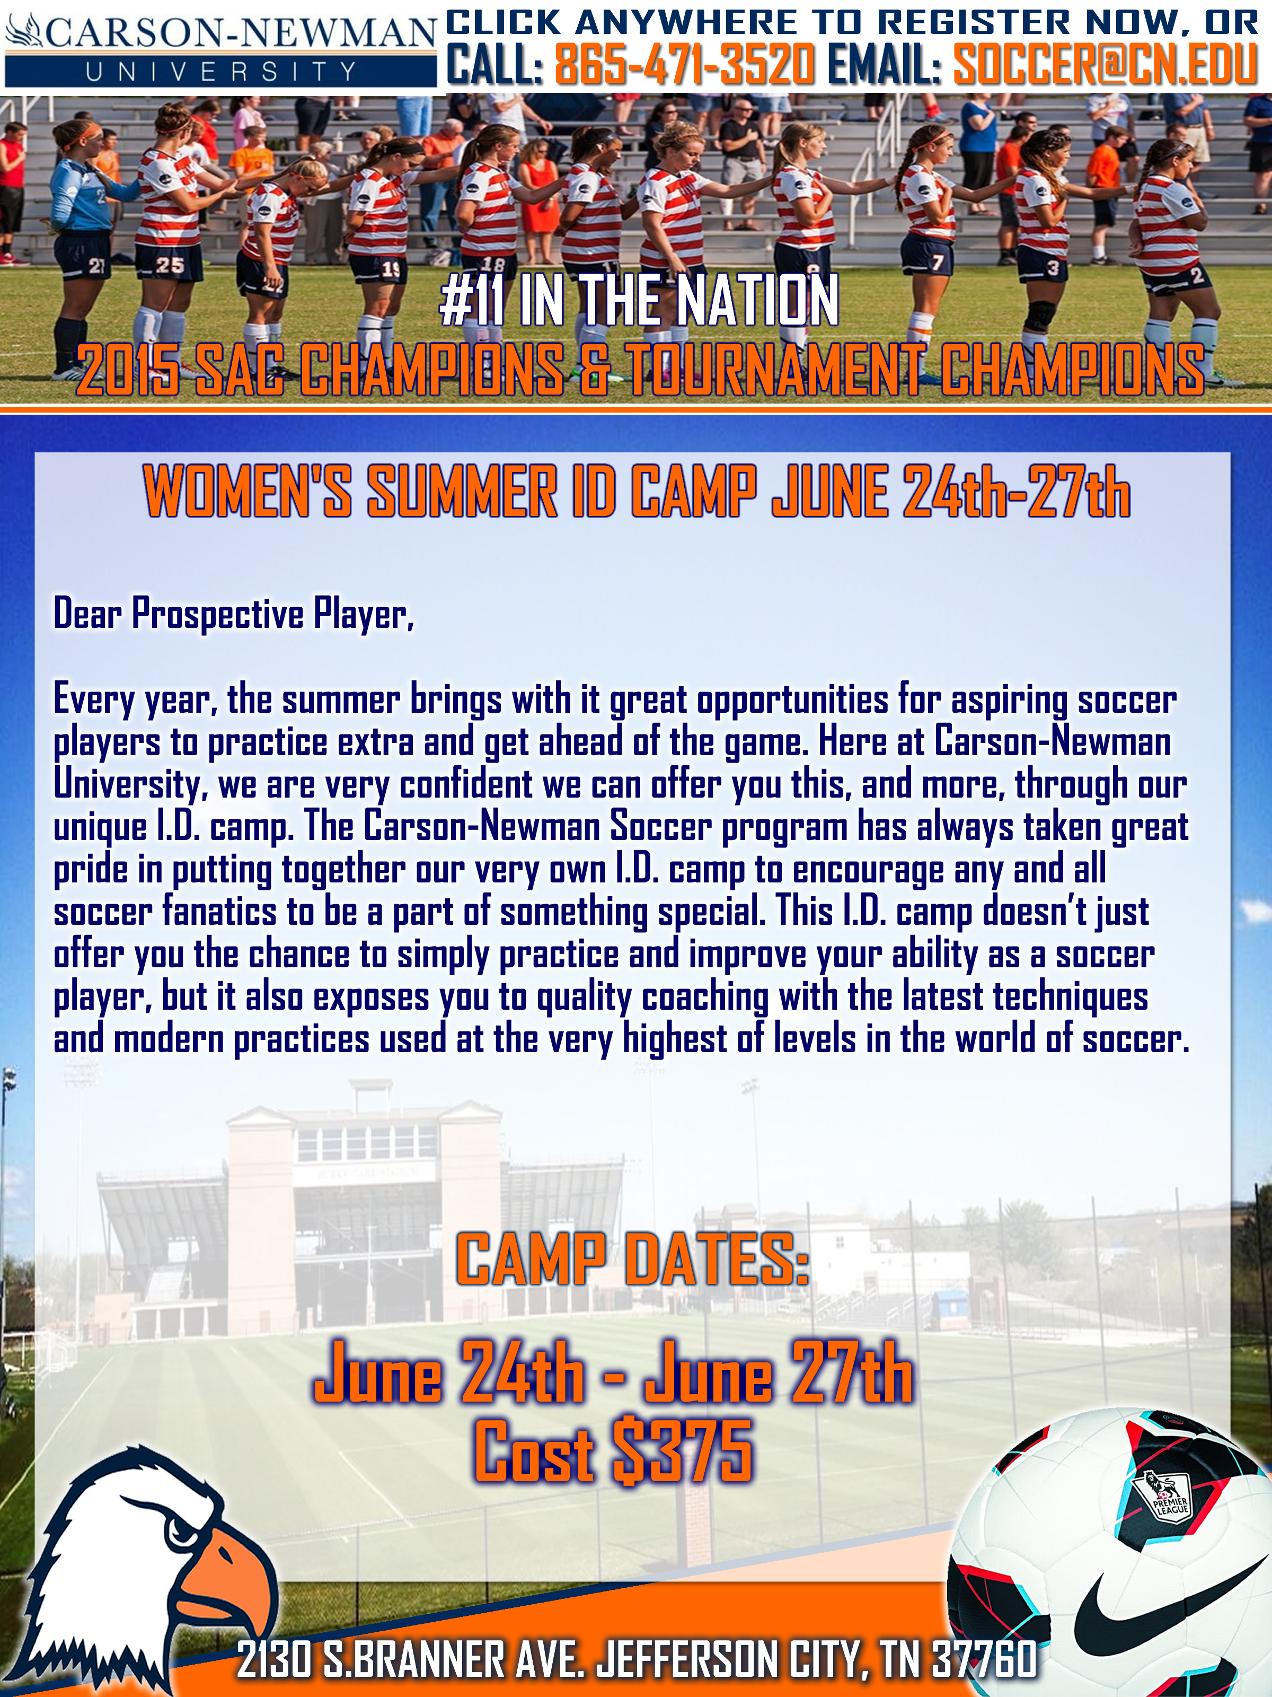 Moodie sets dates for Summer I.D. camps